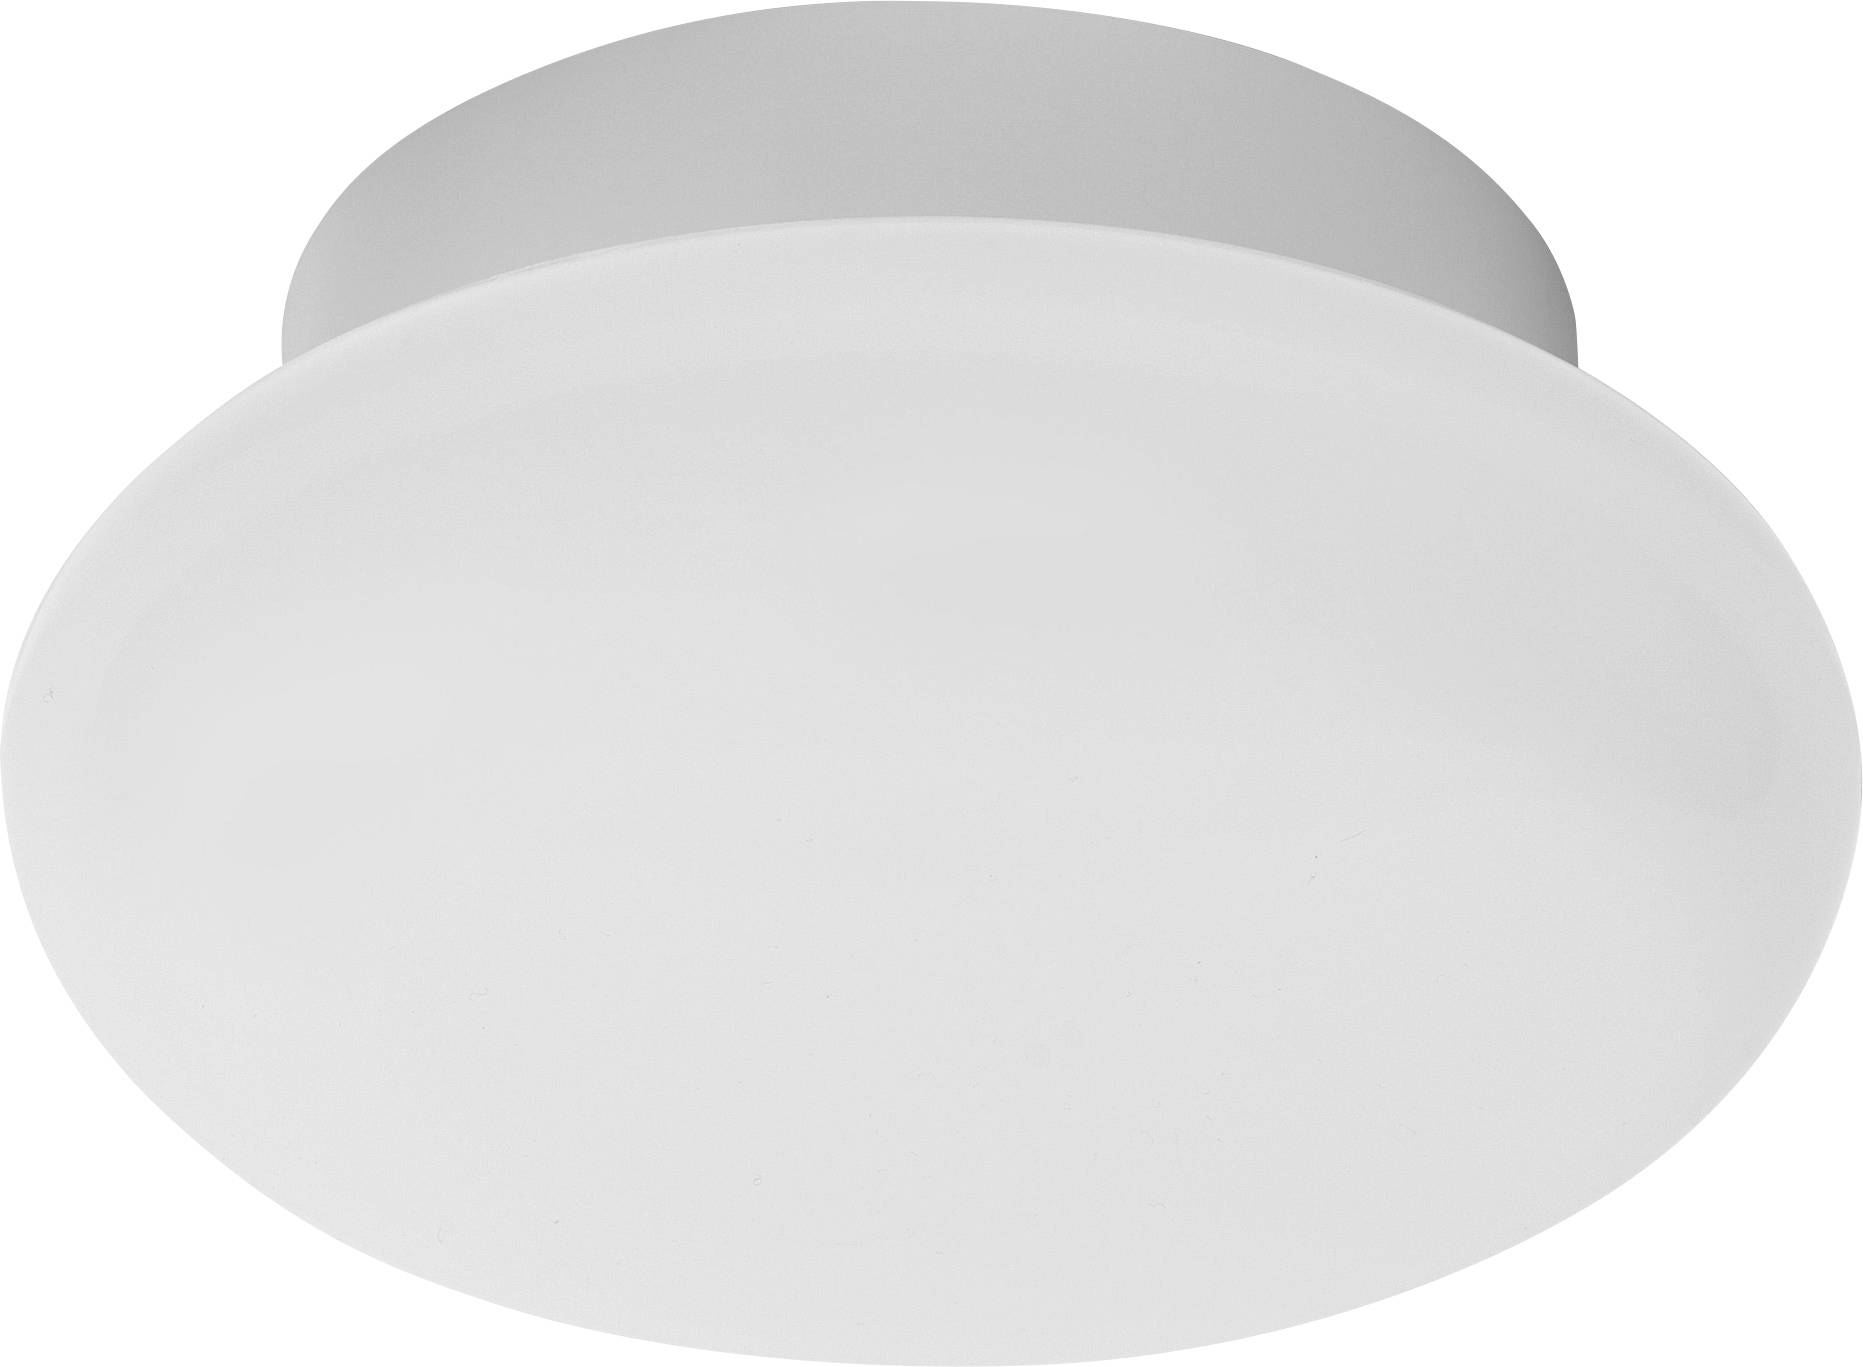 LEDVANCE BATHROOM DECORATIVE CEILING AND WALL WITH WIFI TECHNOLOGY 4058075574410 LED-Bad-Decken